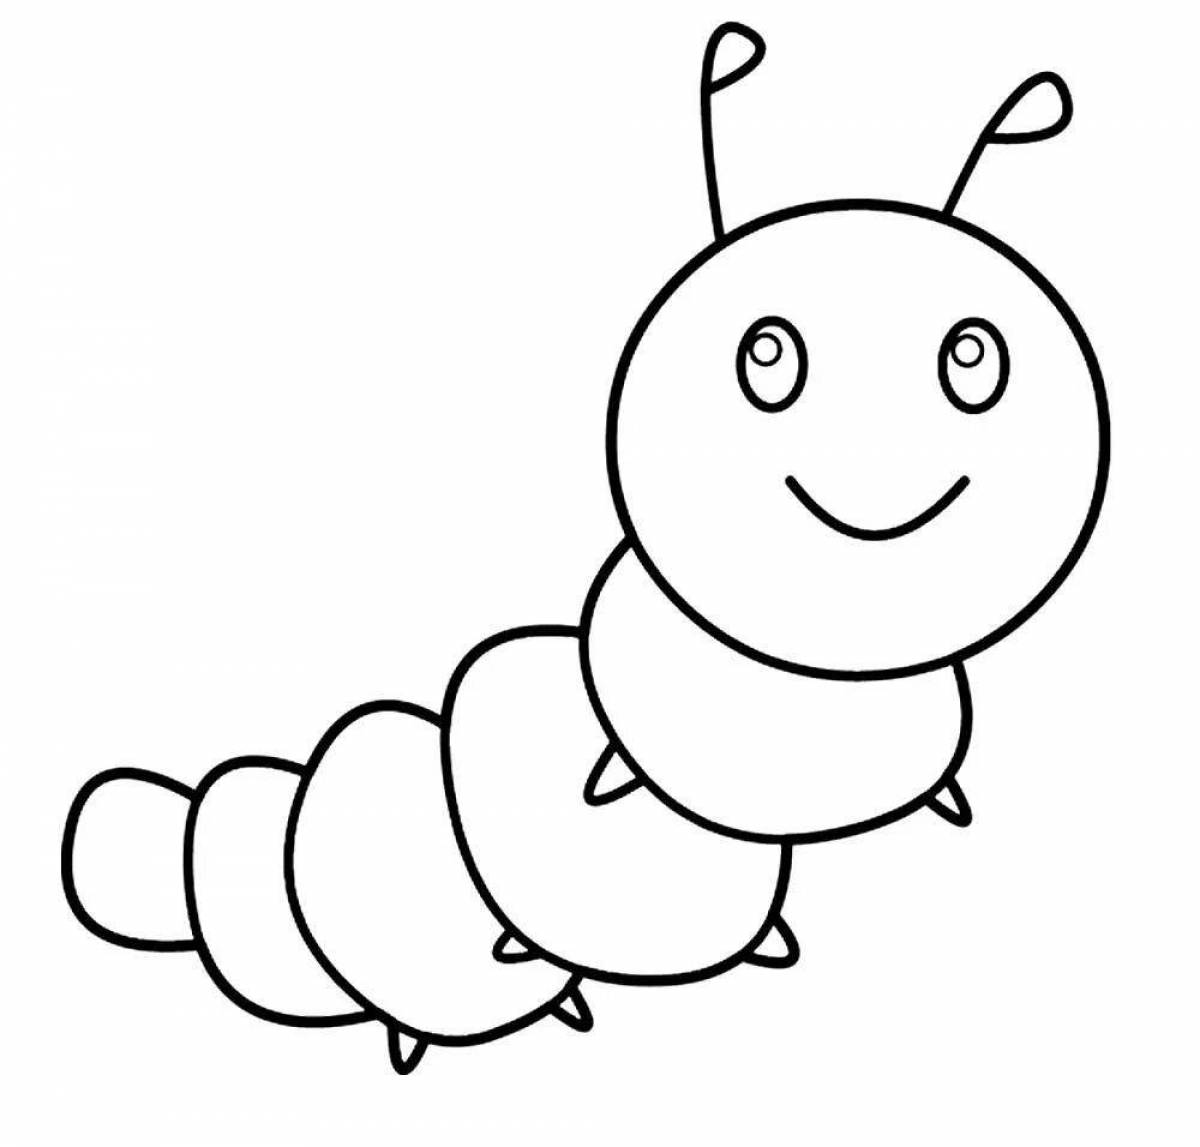 Coloring caterpillar for children 2-3 years old